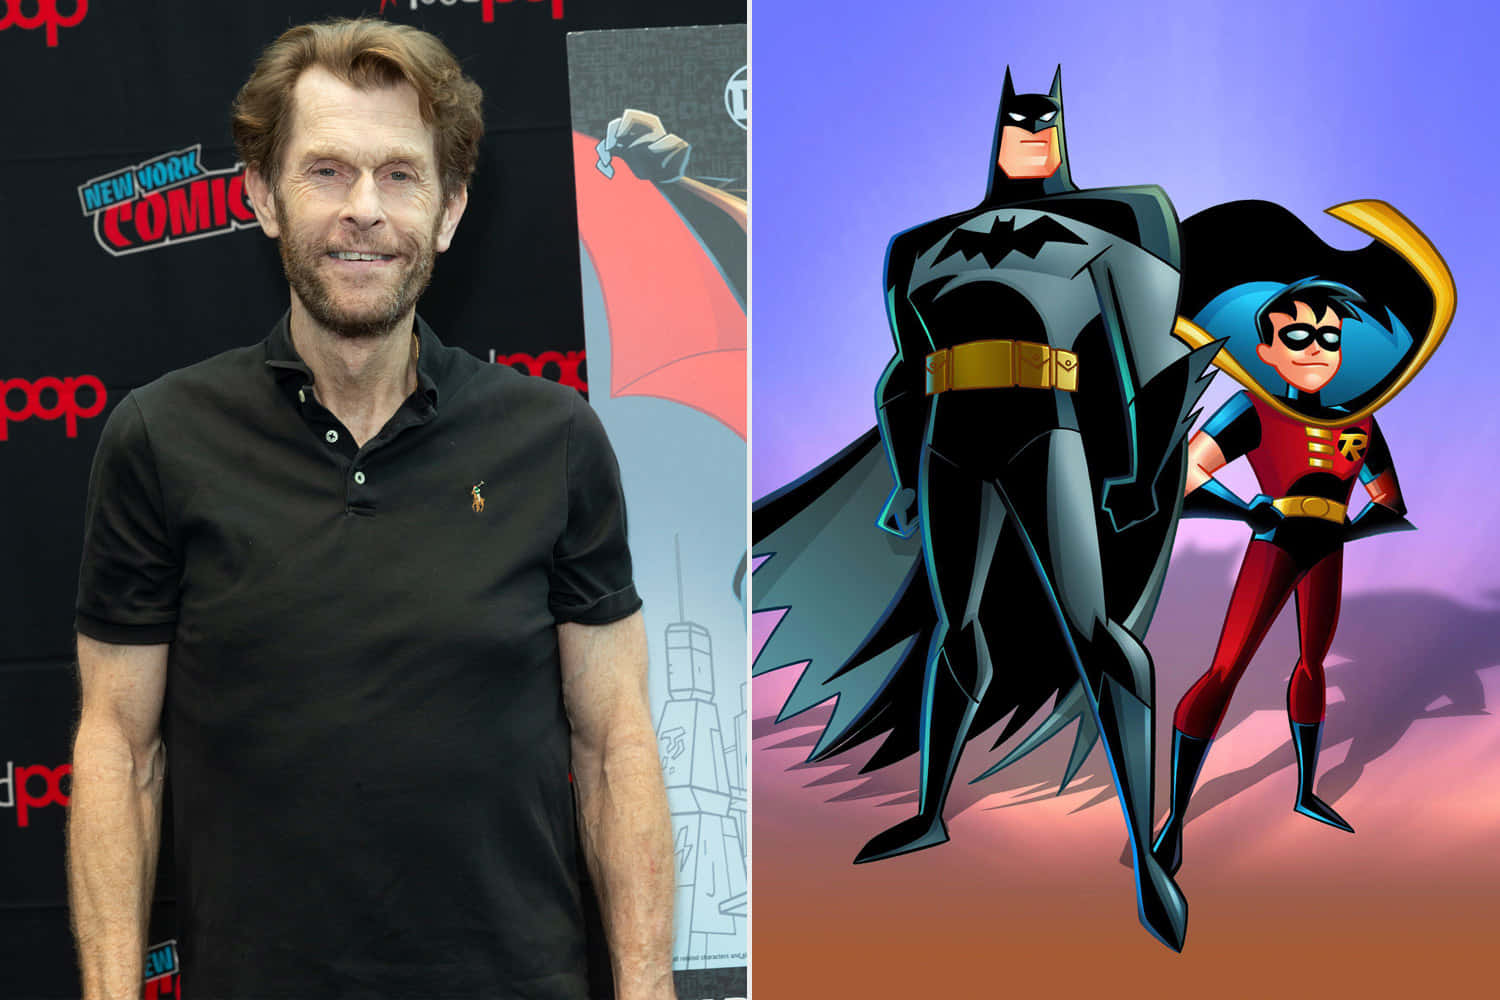 Kevin Conroy, the voice of Batman, behind the scenes in recording studio Wallpaper